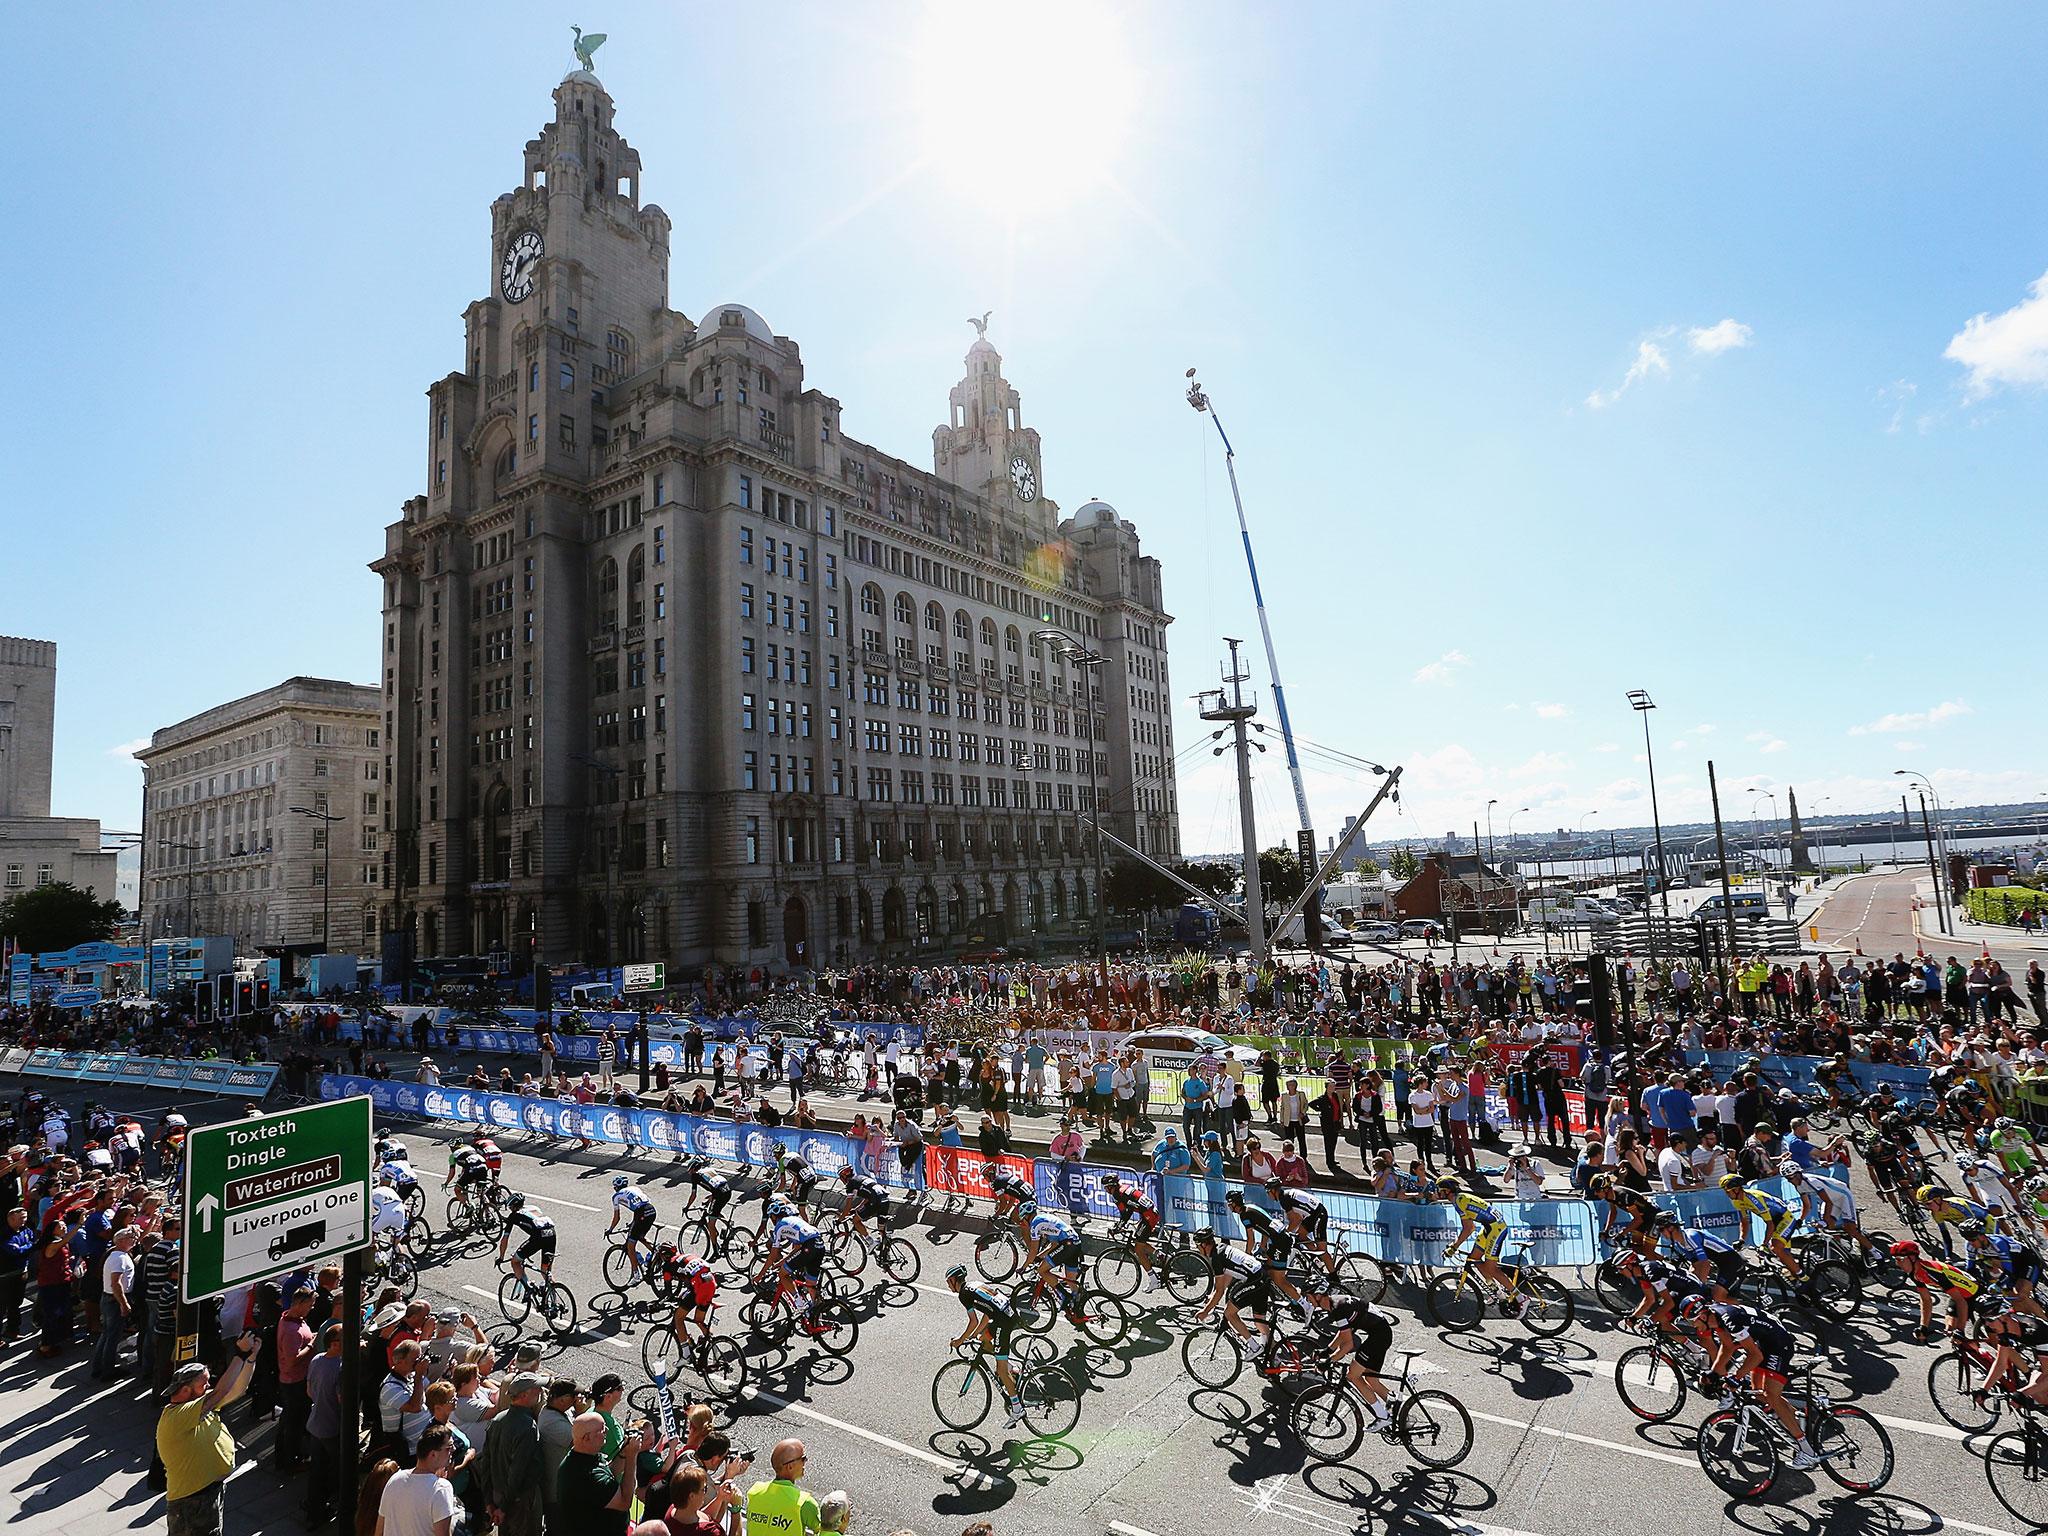 Liverpool have experience of hosting major sporting events